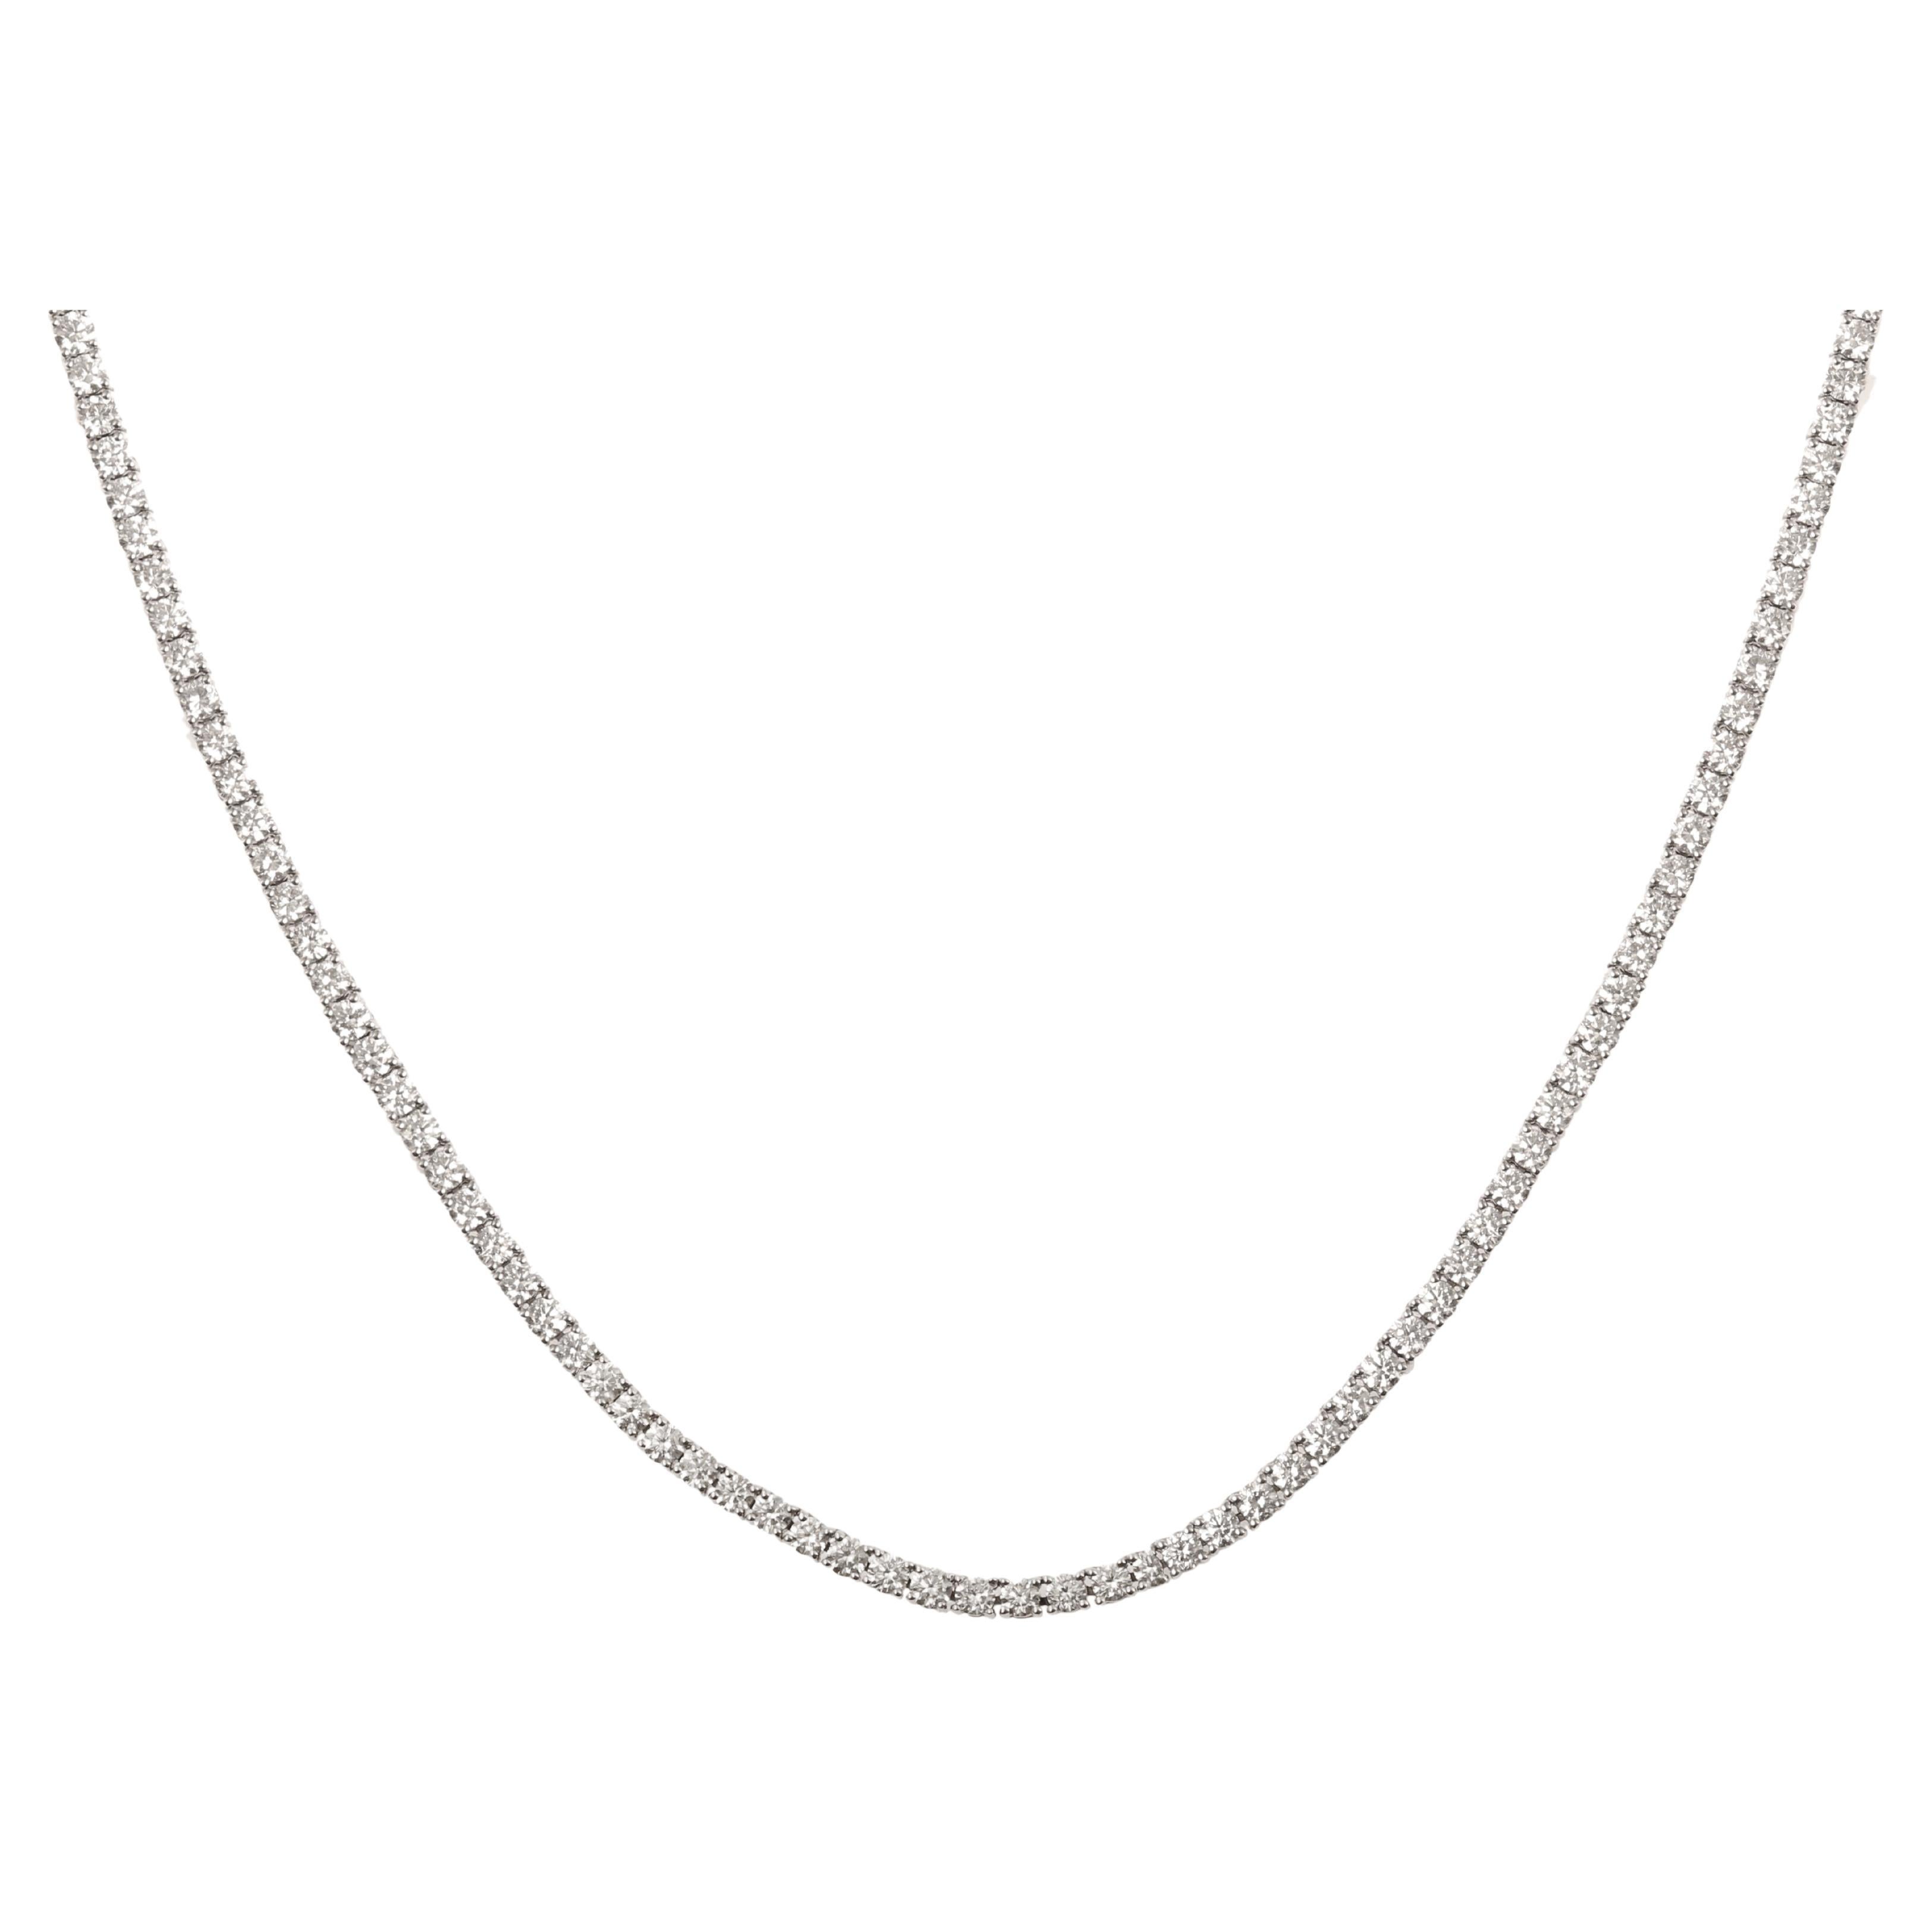 10.15 Carats Diamonds 18 Carats White Gold River Necklace For Sale